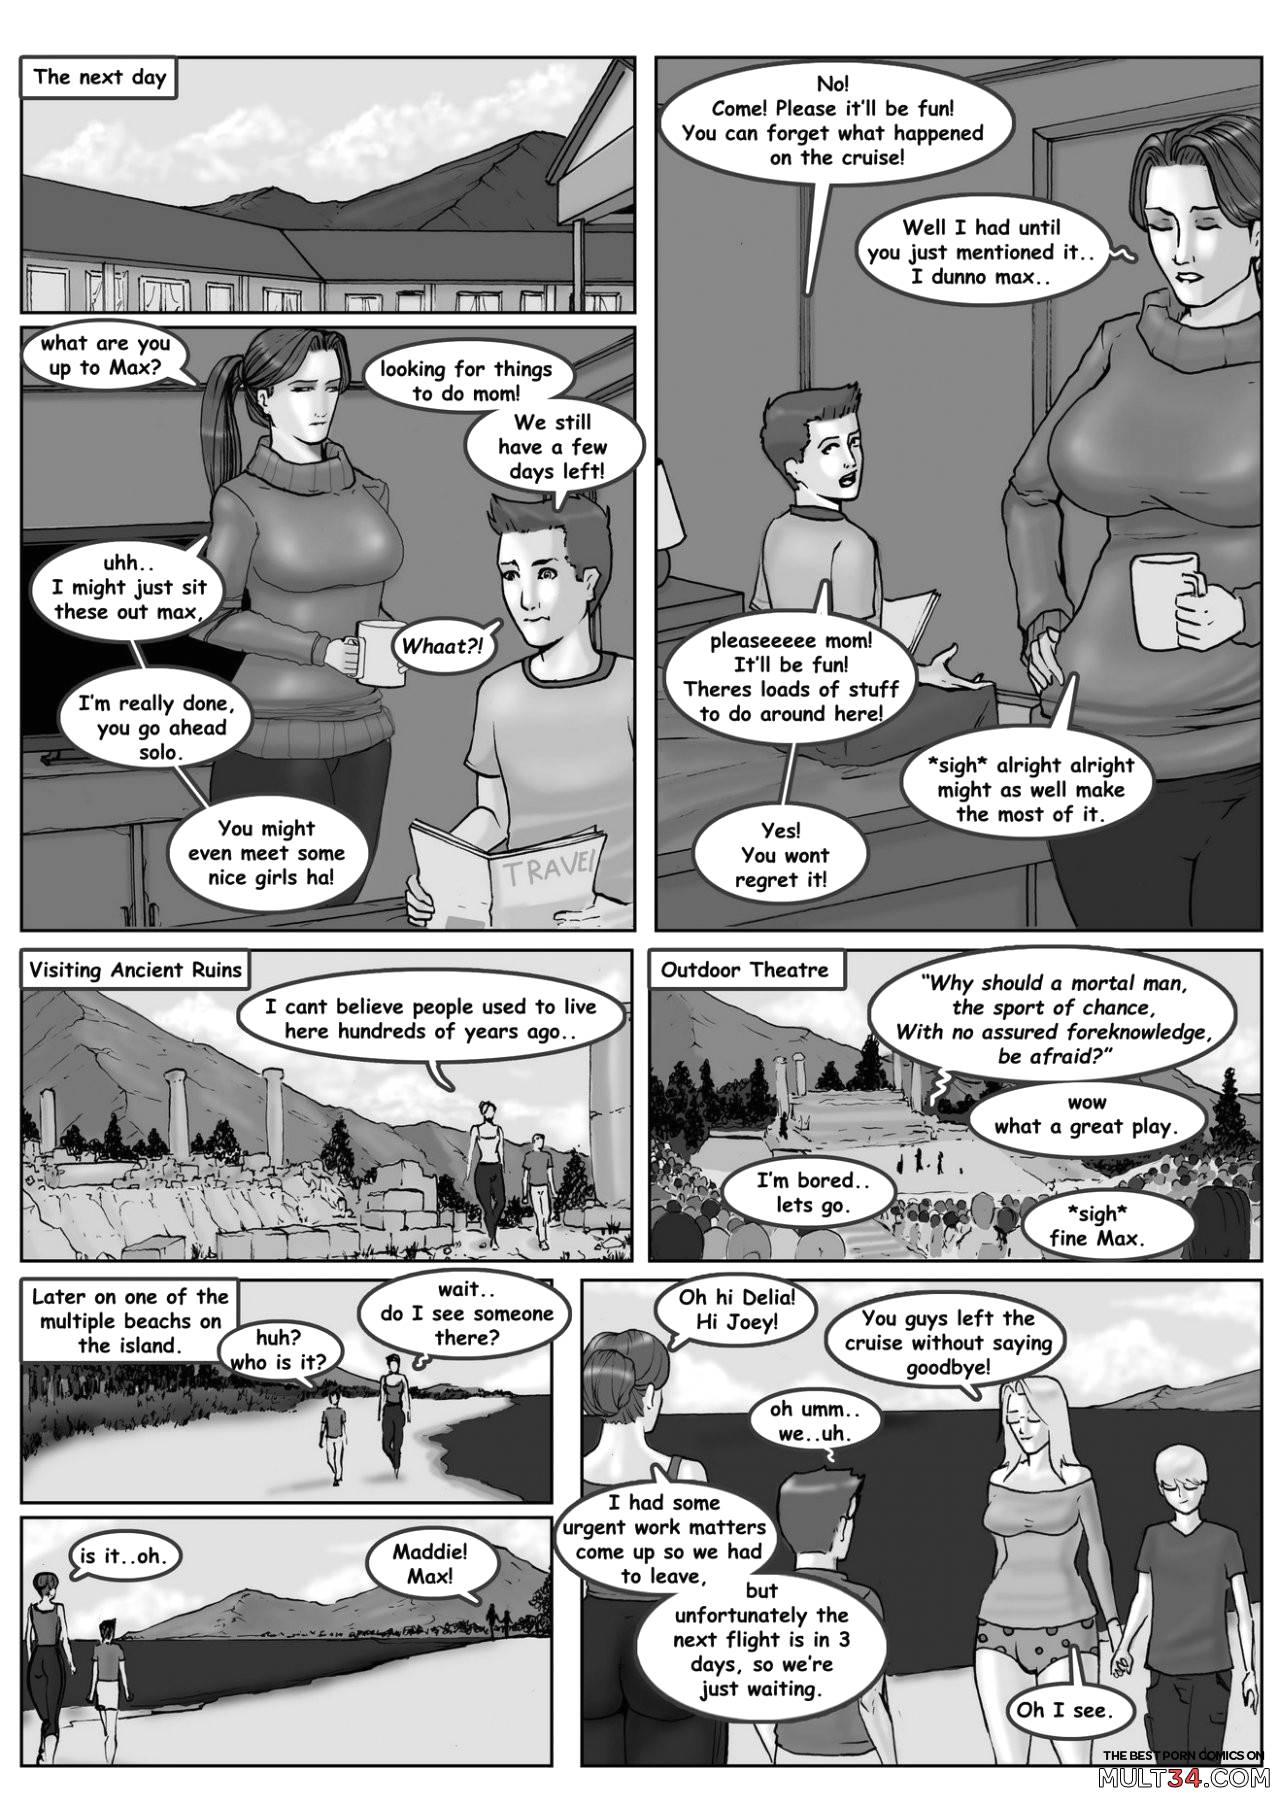 Max and Maddie's Island Quest: Part 1: Jocasta page 19